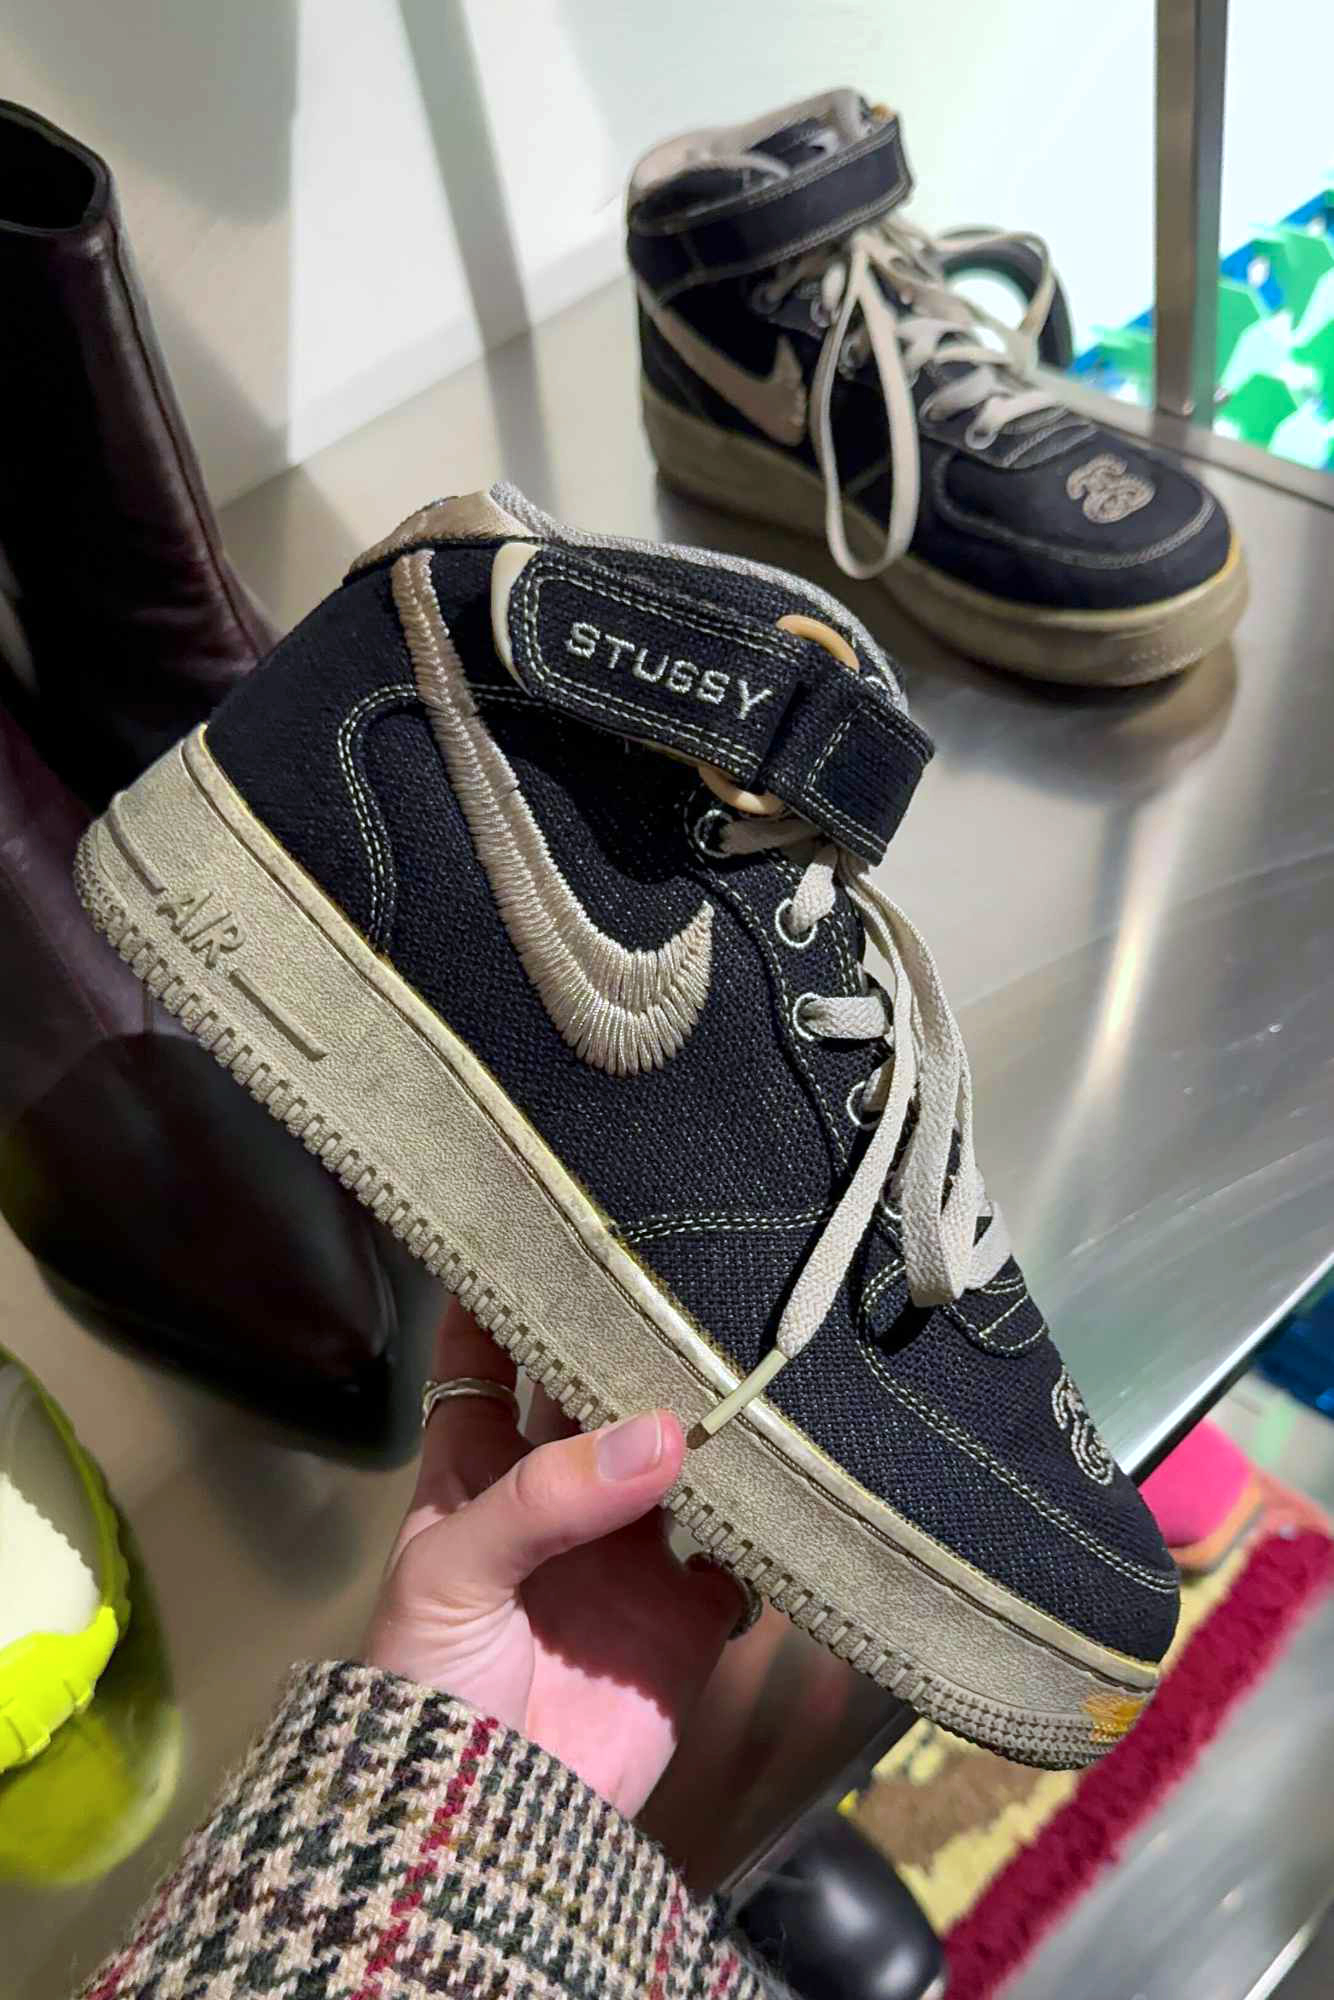 In-hand photos of Stussy & Nike's dyed Air Force 1 Mid sneaker